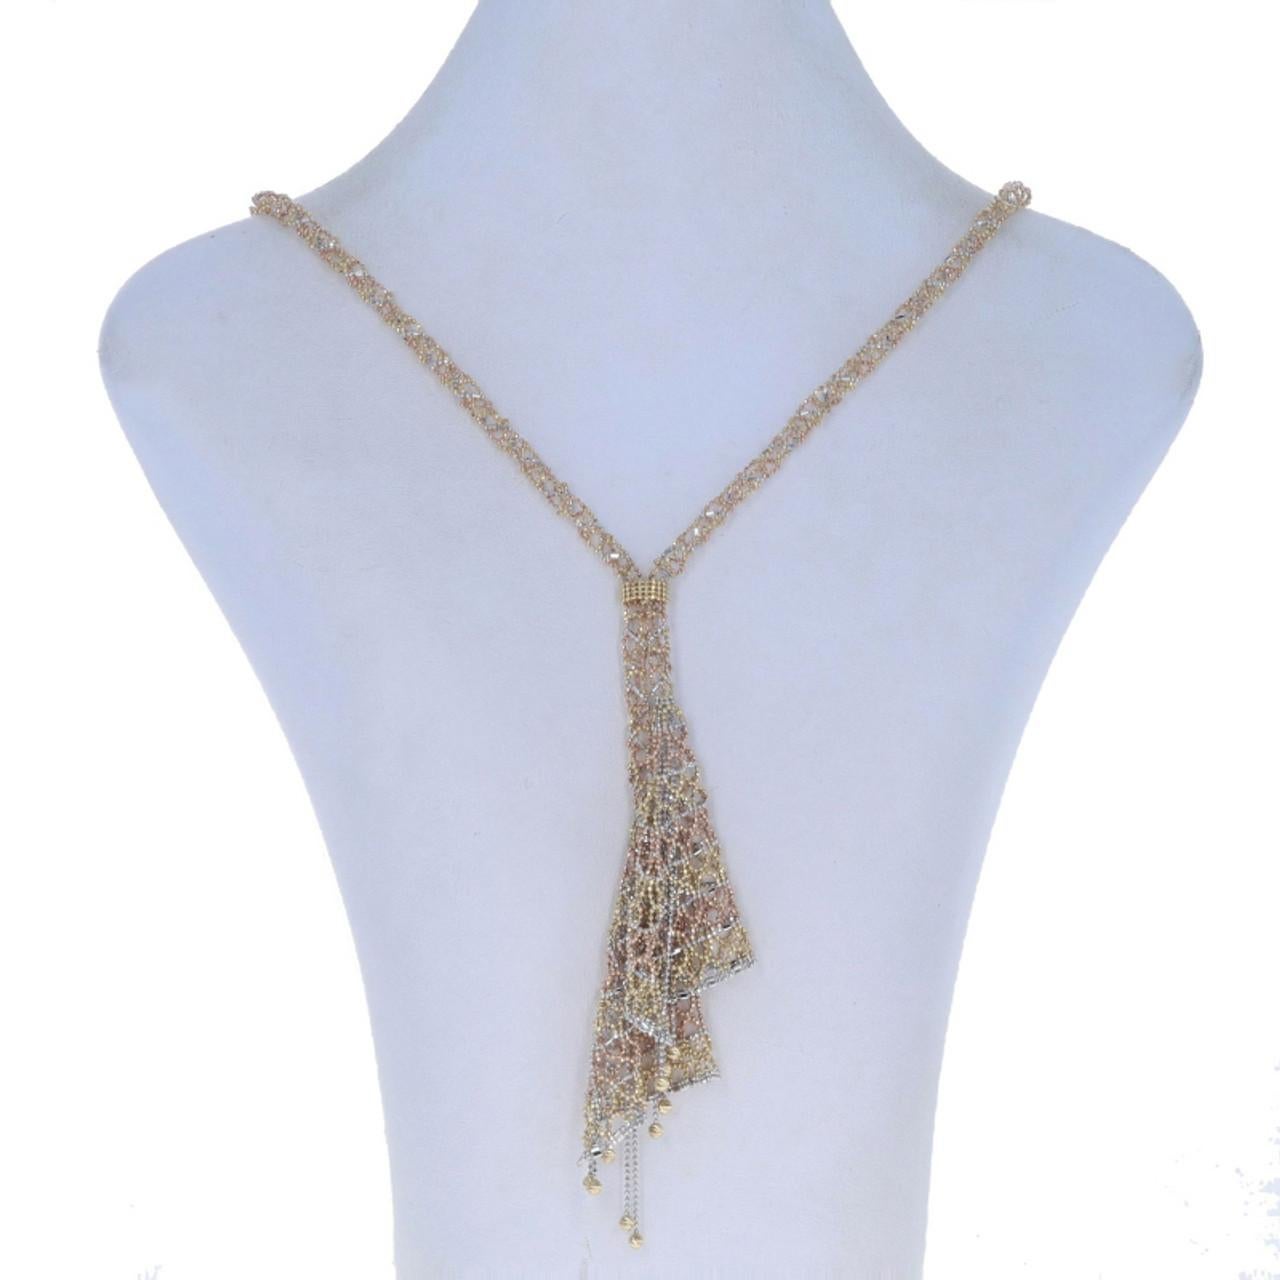 Yellow Gold Calla Lily Lariat Necklace 18k Flowers Adjustable

Additional information:
Material: Metal 18k Yellow Gold, 18k White Gold, & 18k Rose Gold
Style: Lariat
Chain Styles: Diamond Cut Bead & Diamond Cut Dot Dash Bead
Necklace Style: